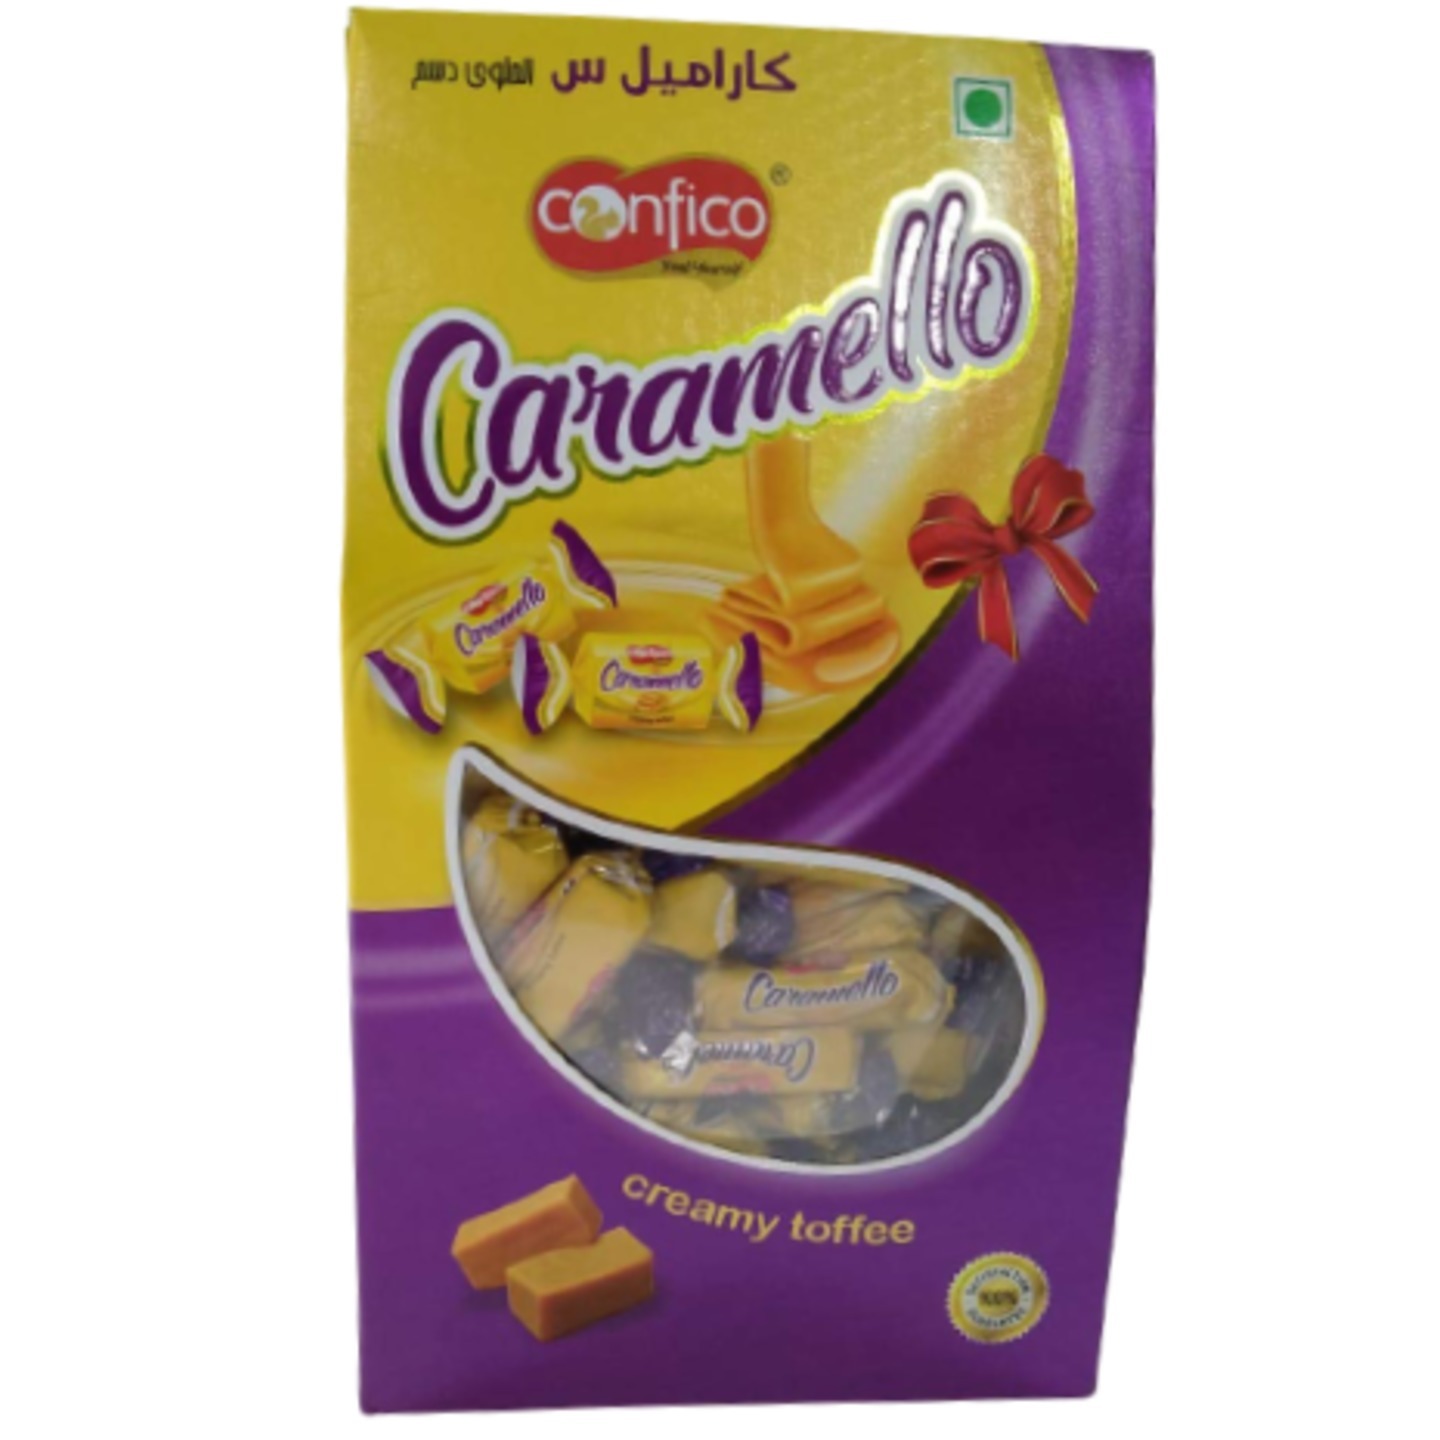 Confico Caramello Rich Creamy Toffee  Pack of 2